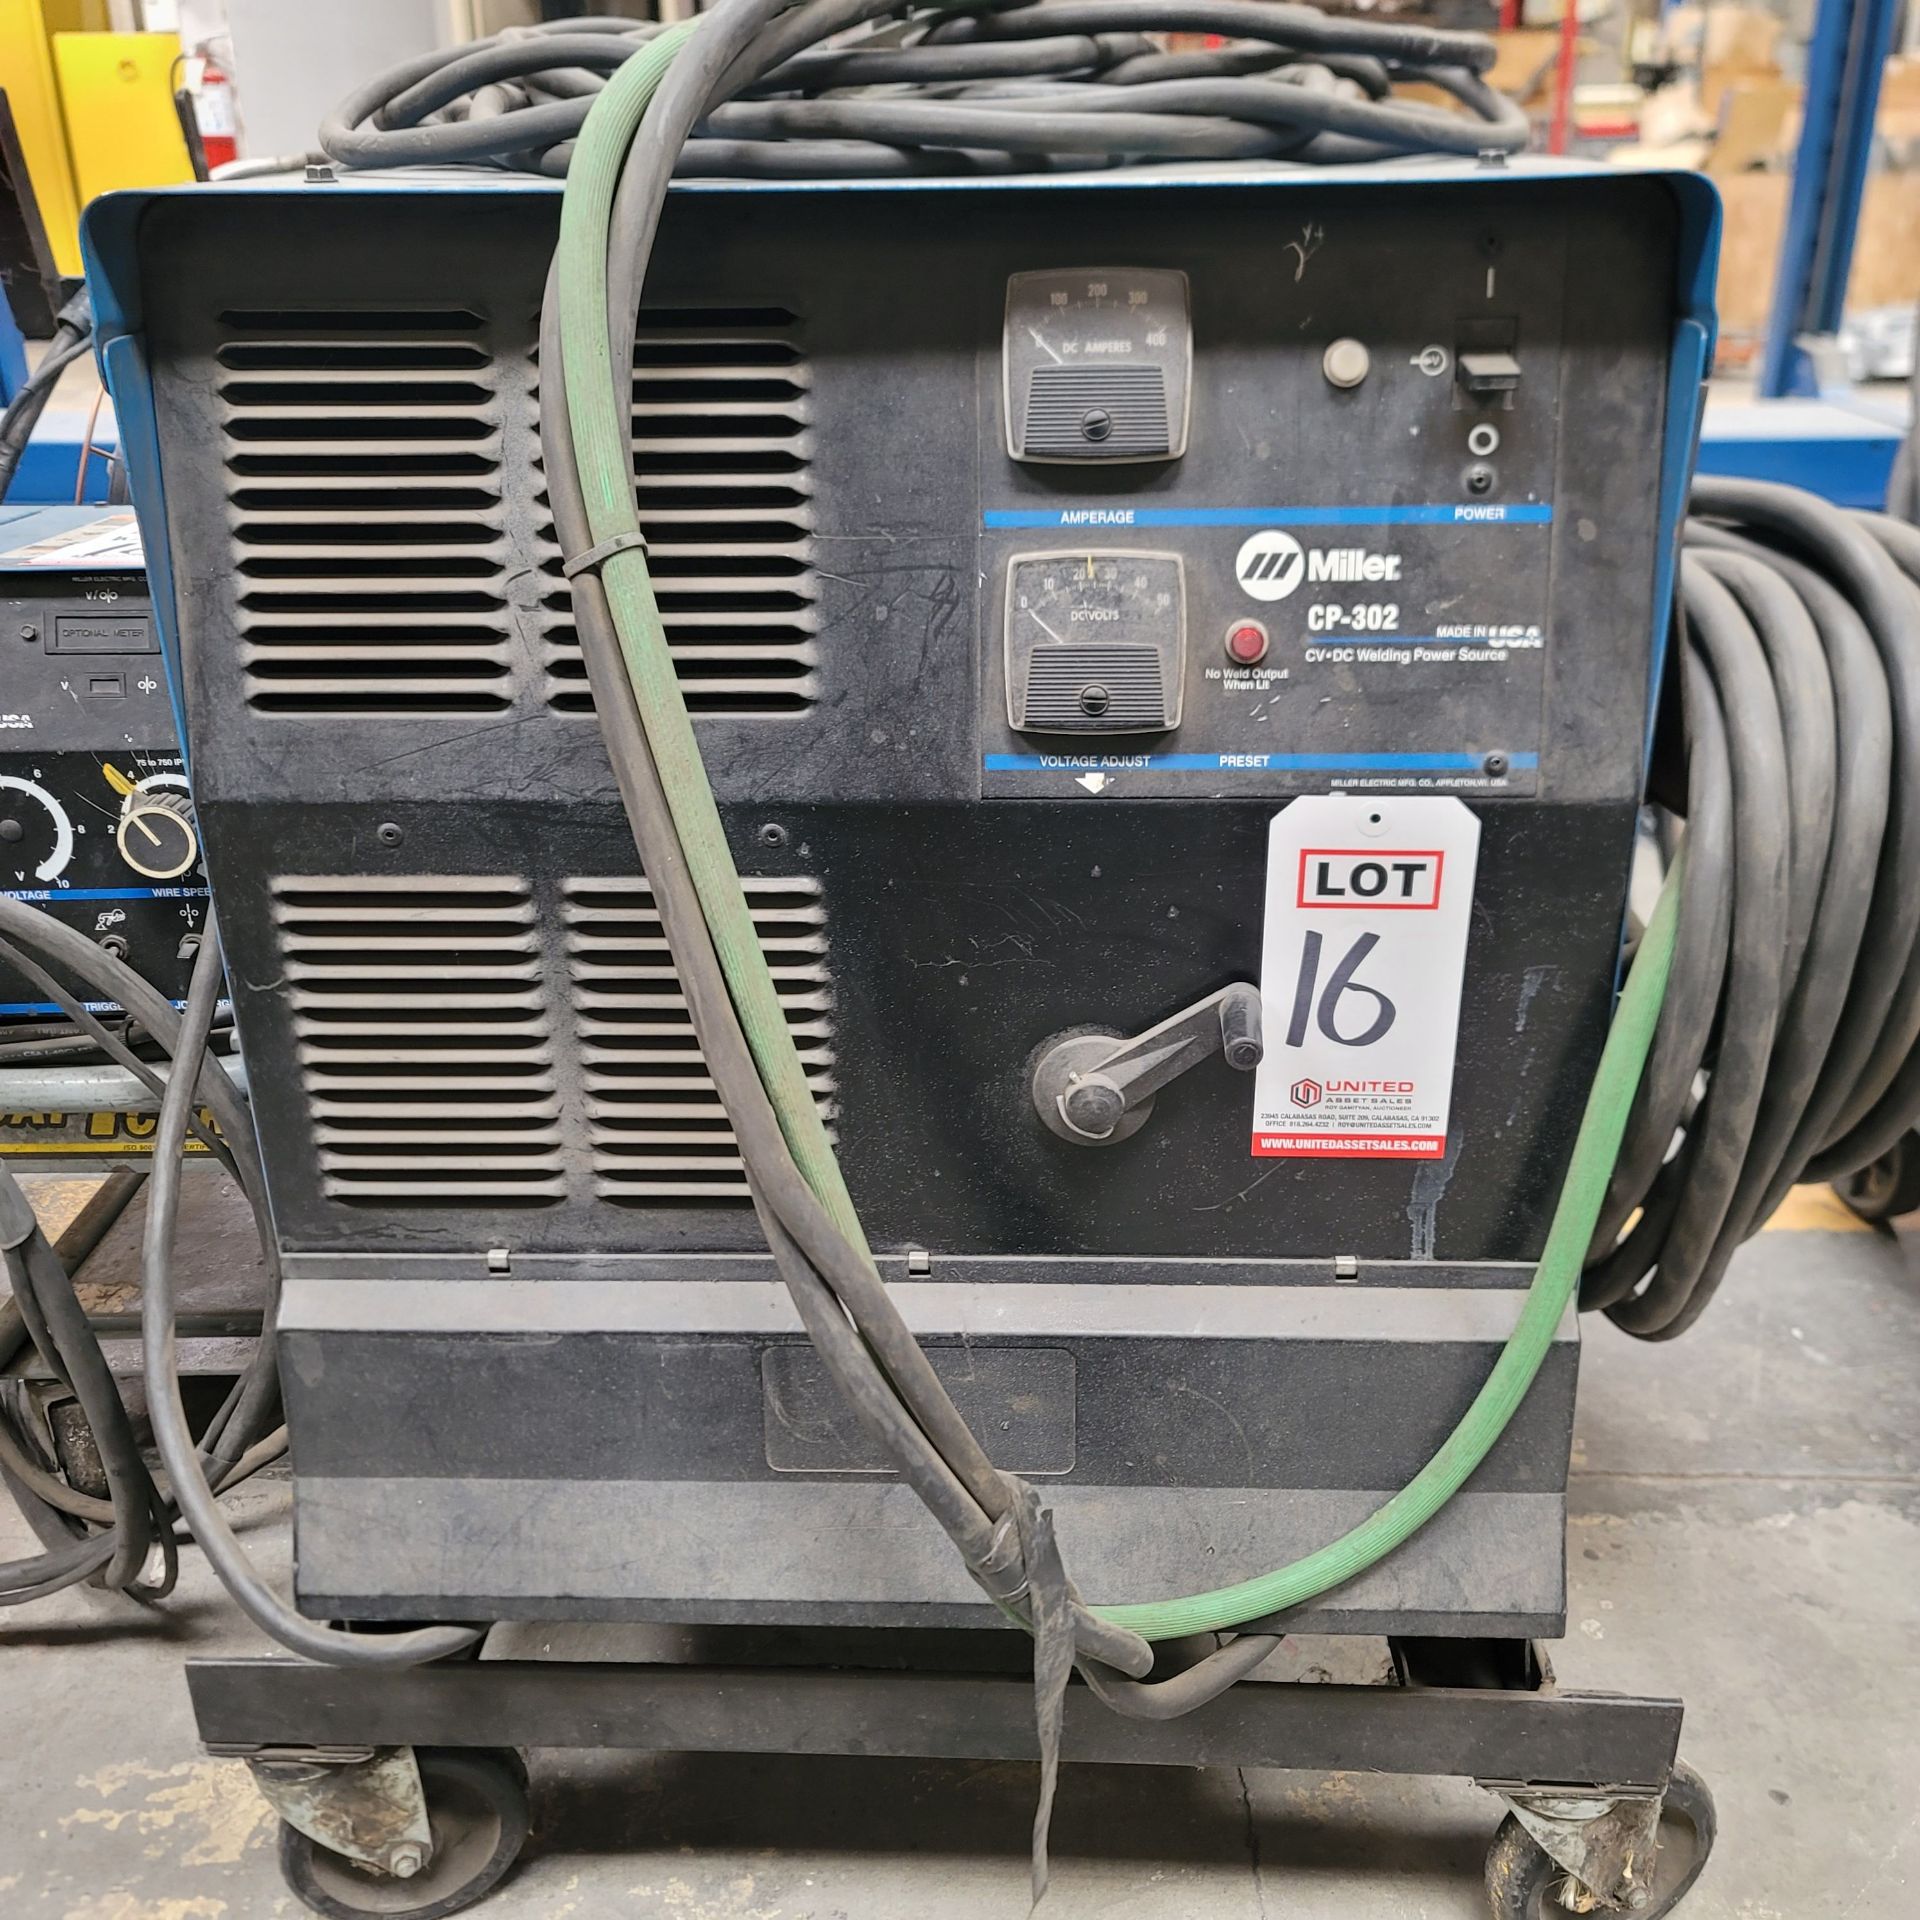 MILLER CP-302 WELDING POWER SOURCE, W/ MILLER 22A 24V WIRE FEEDER, STOCK NO. 903786, S/N KH450266 - Image 2 of 5